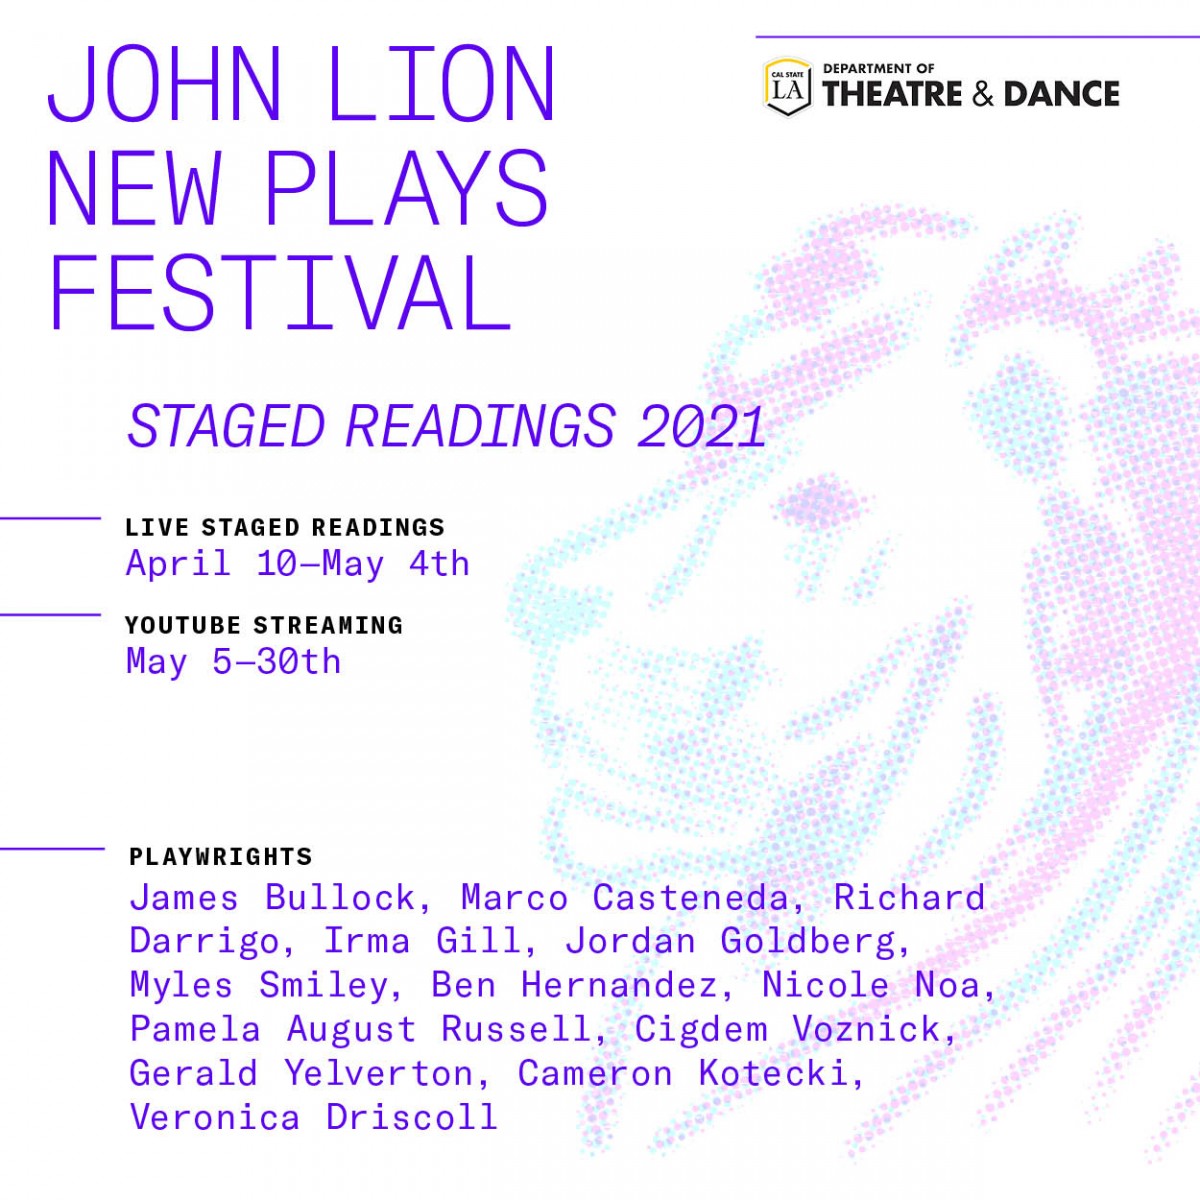 New Plays Festival